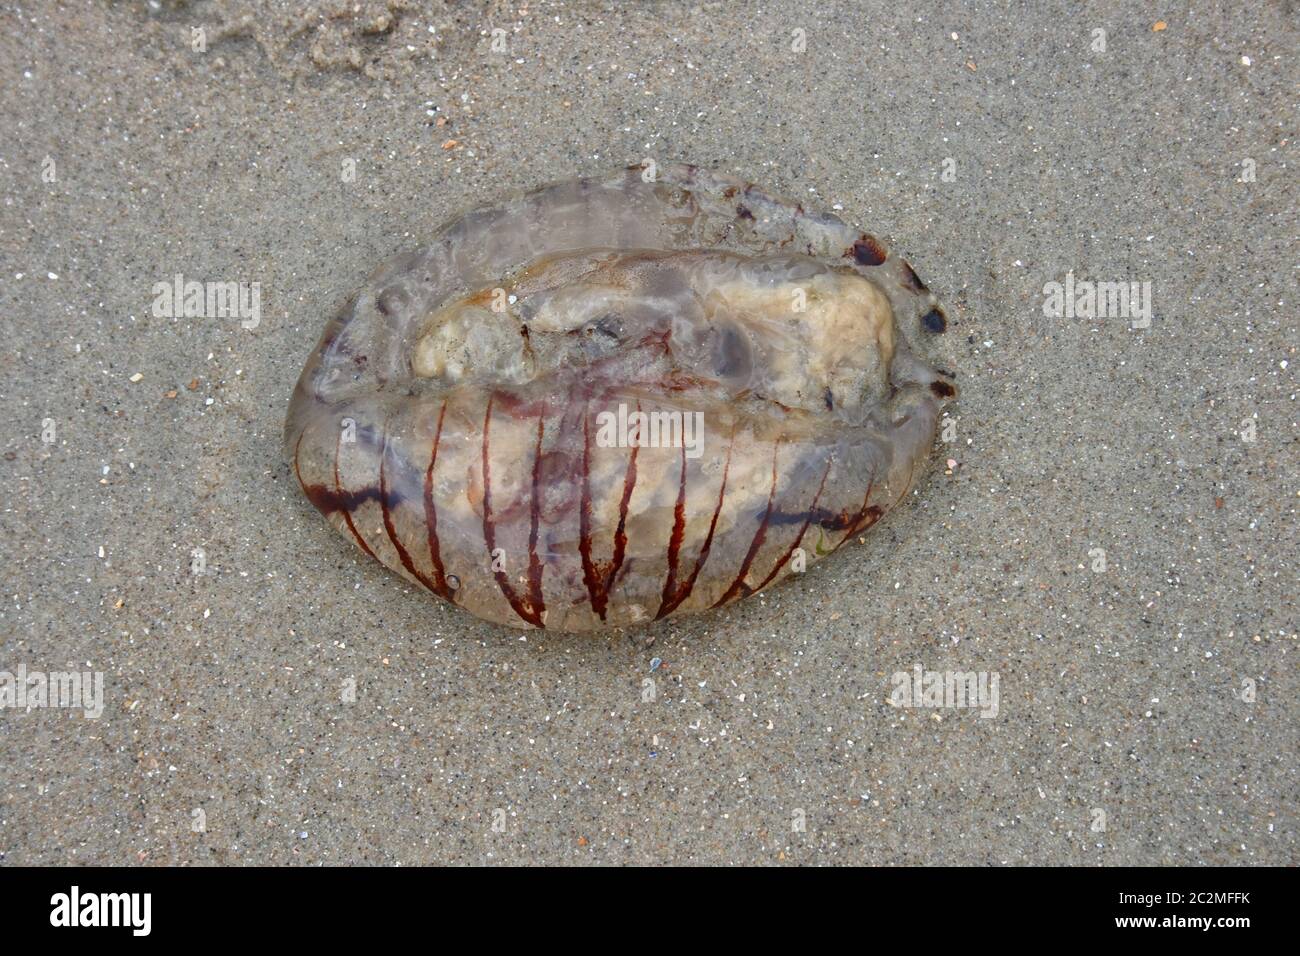 A jellyfish washed up on sand Stock Photo